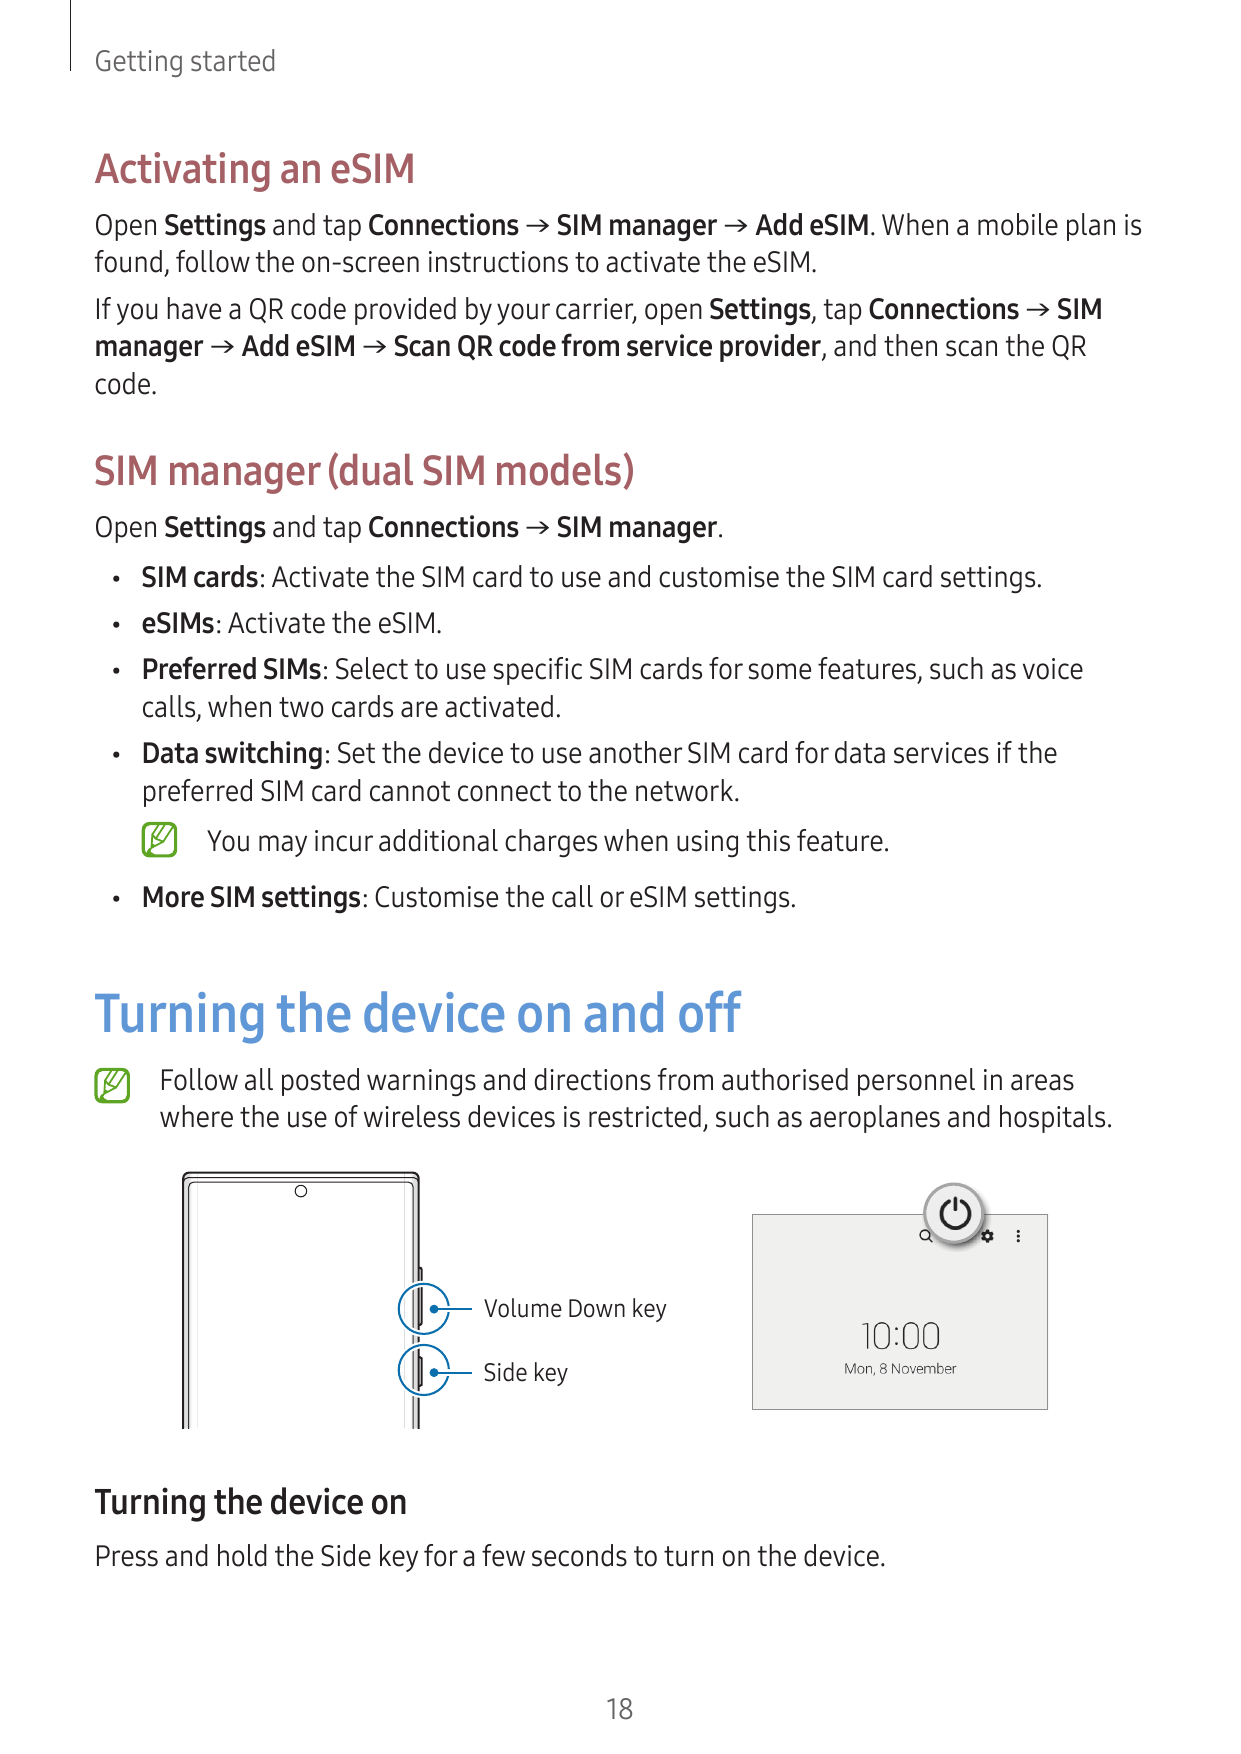 Getting startedActivating an eSIMOpen Settings and tap Connections → SIM manager → Add eSIM. When a mobile plan isfound, follow 